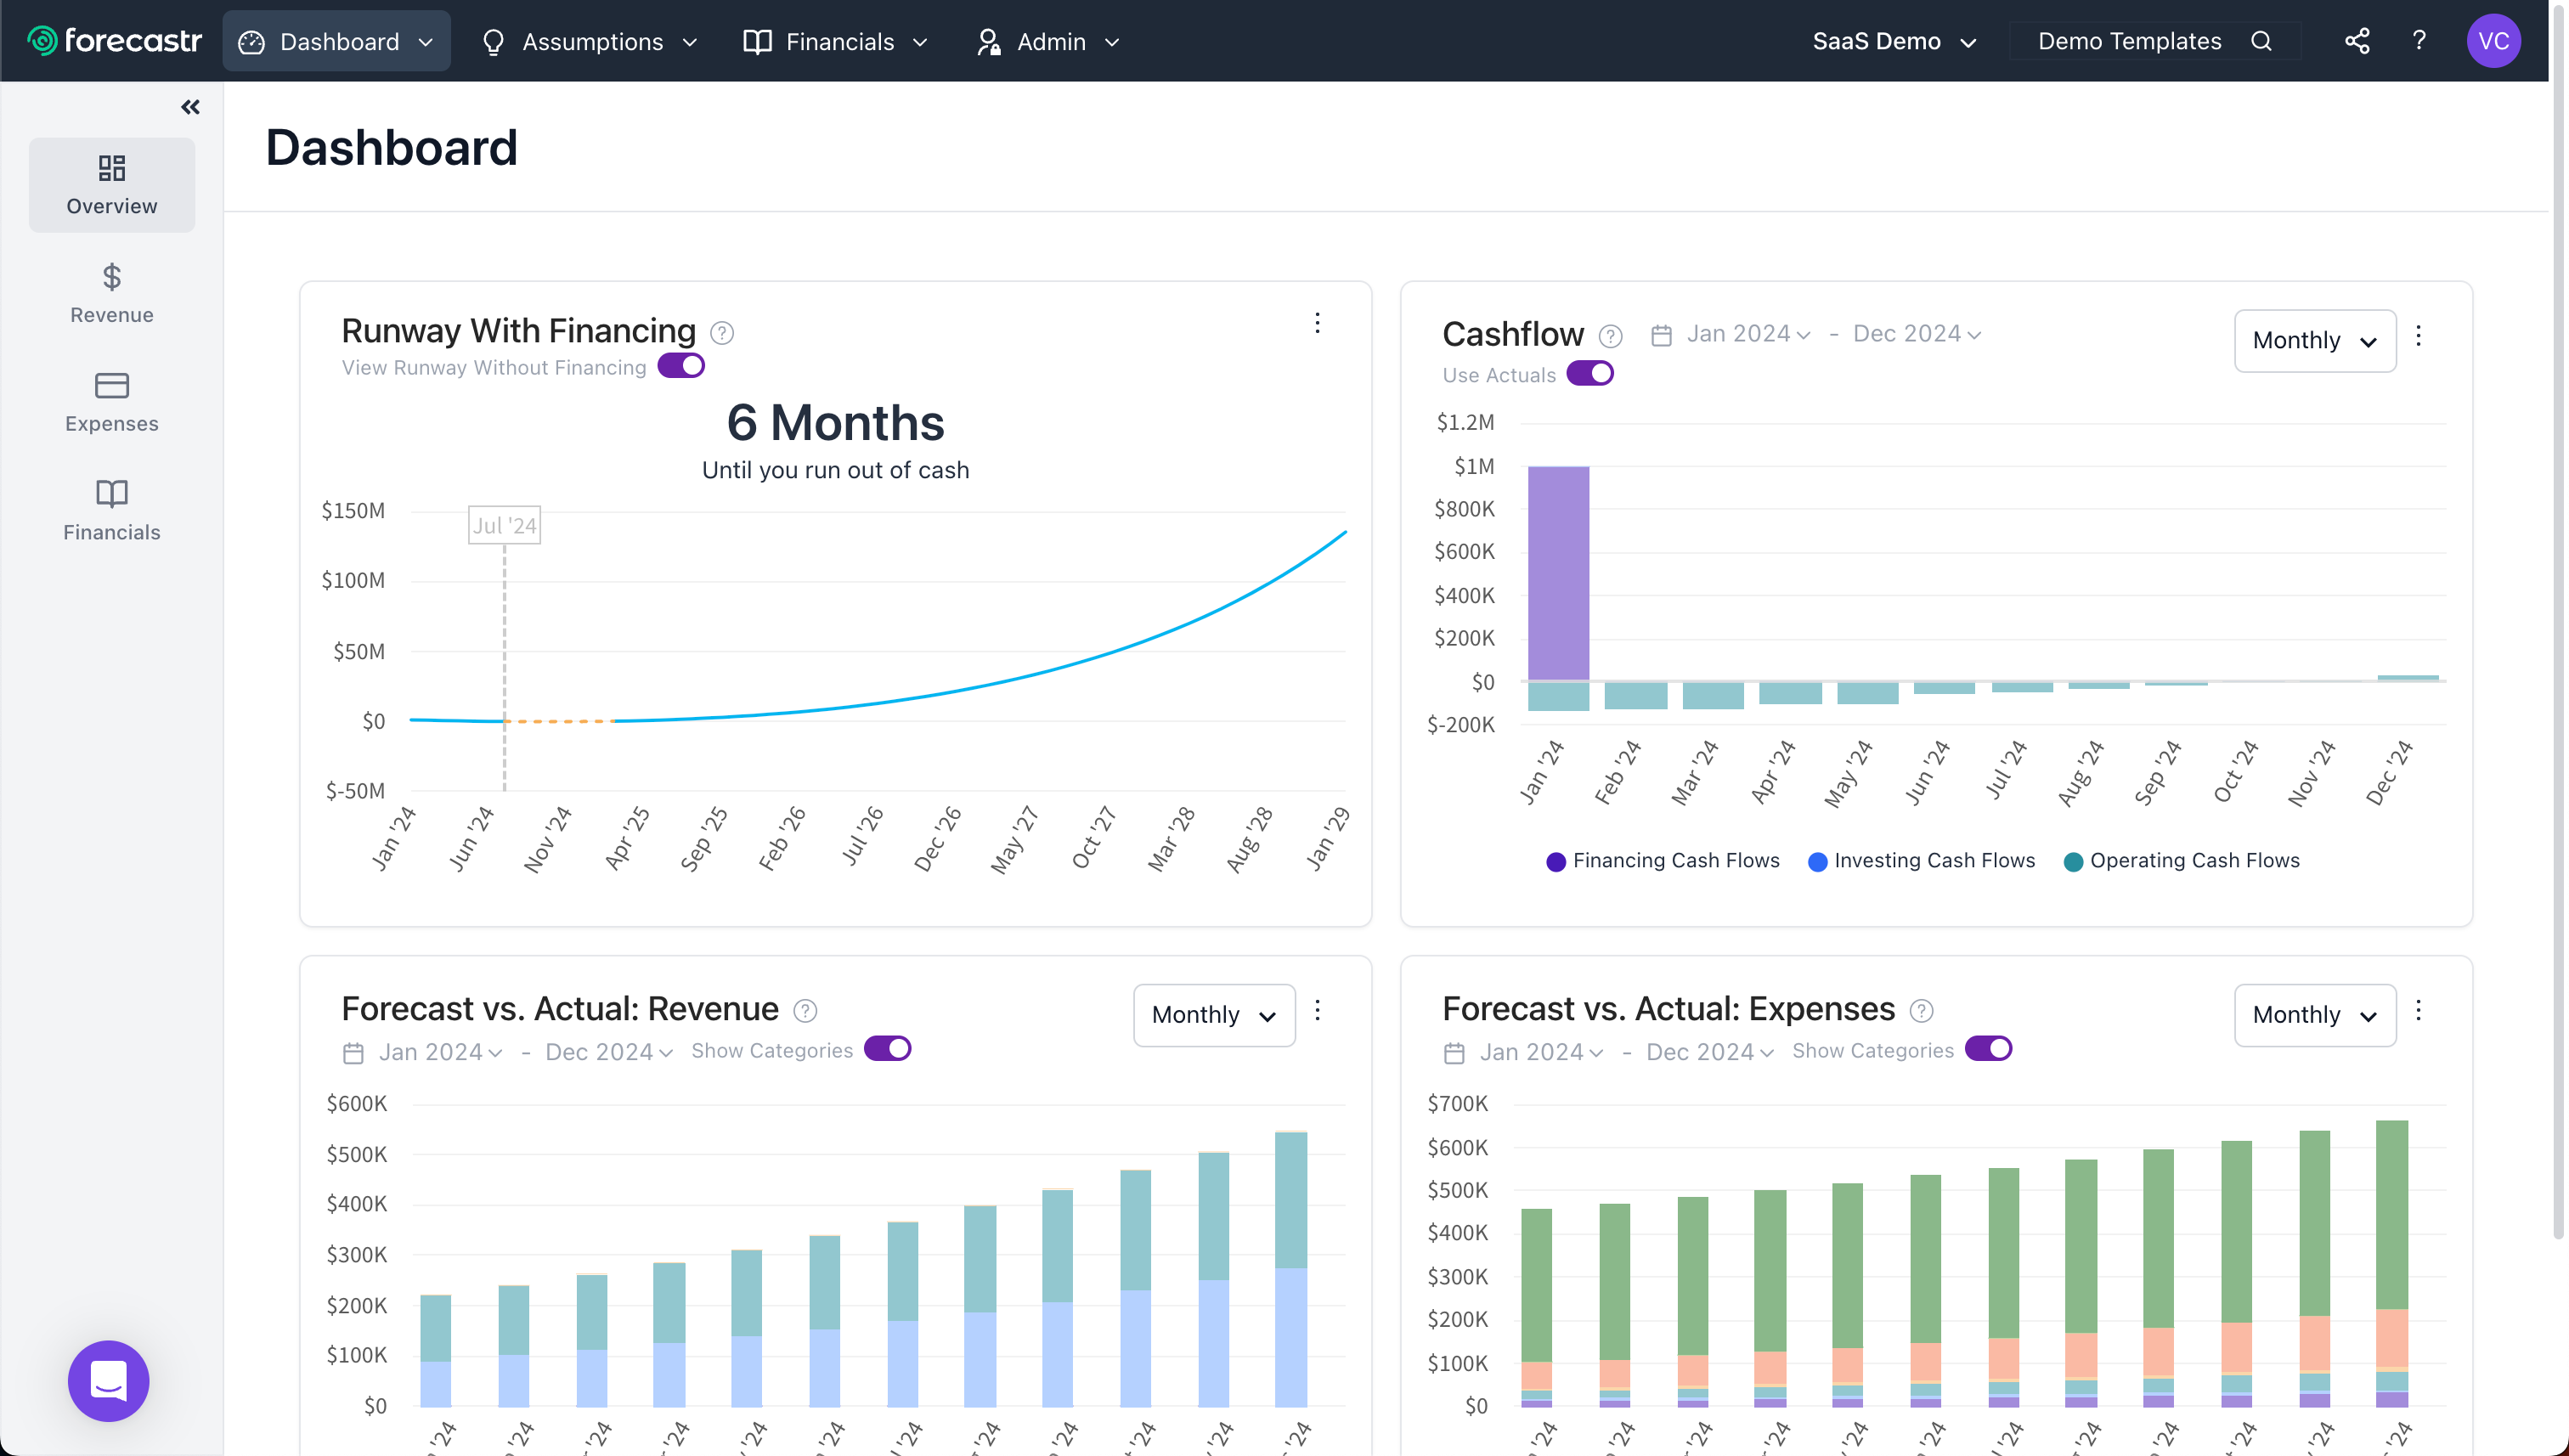 Forecastr's dashboard provides a quick overview of your current and projected finances.